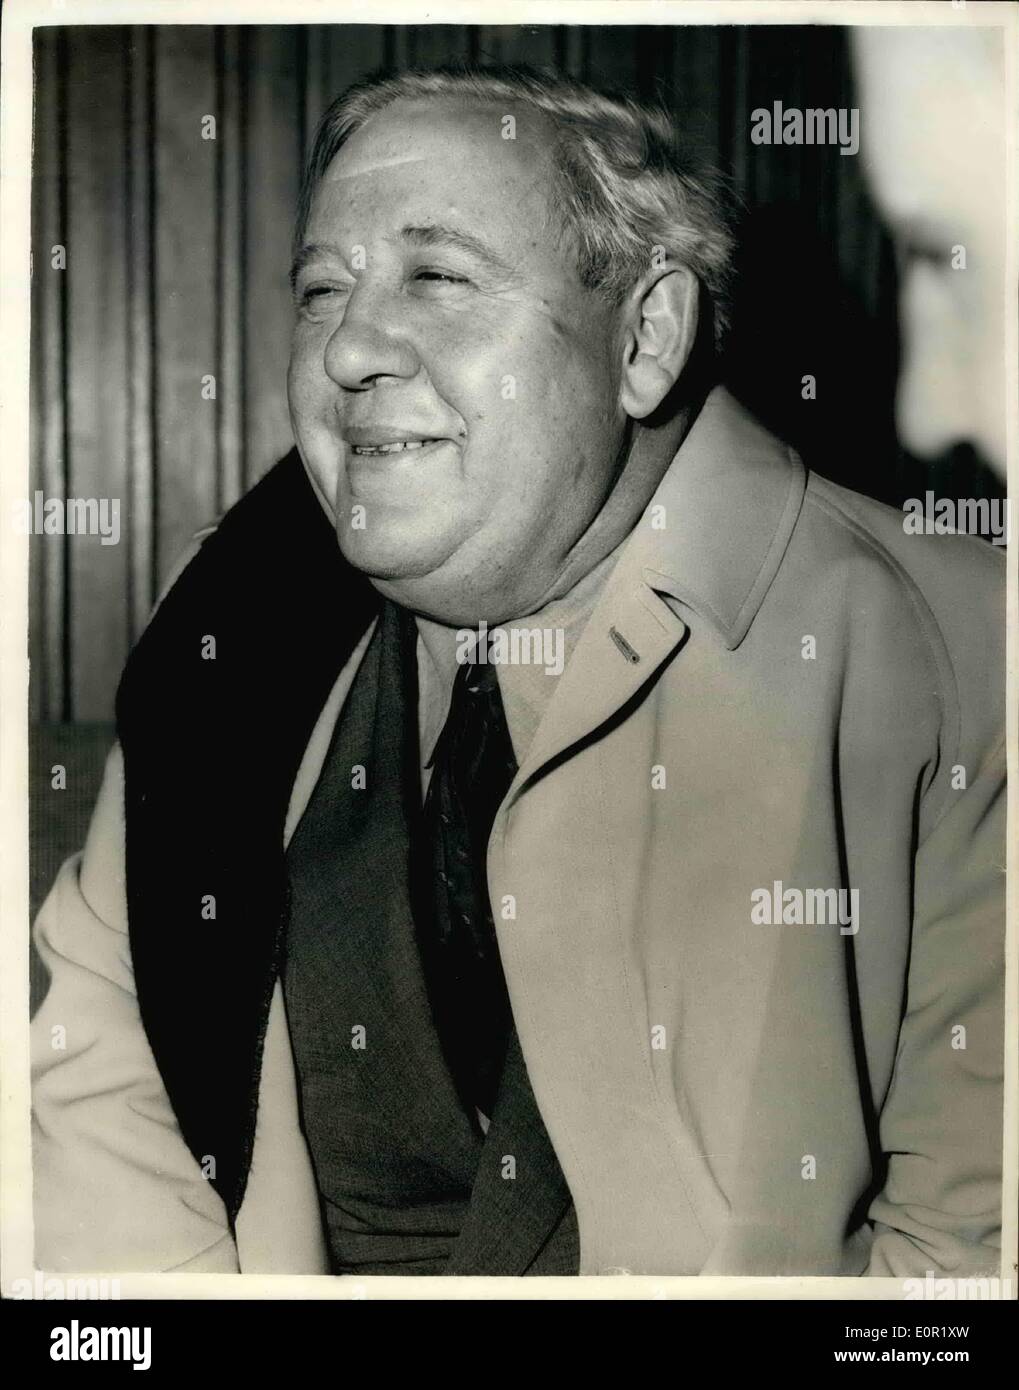 Sep. 09, 1957 - Charles Laughton arrives in London. Famous Star on ...